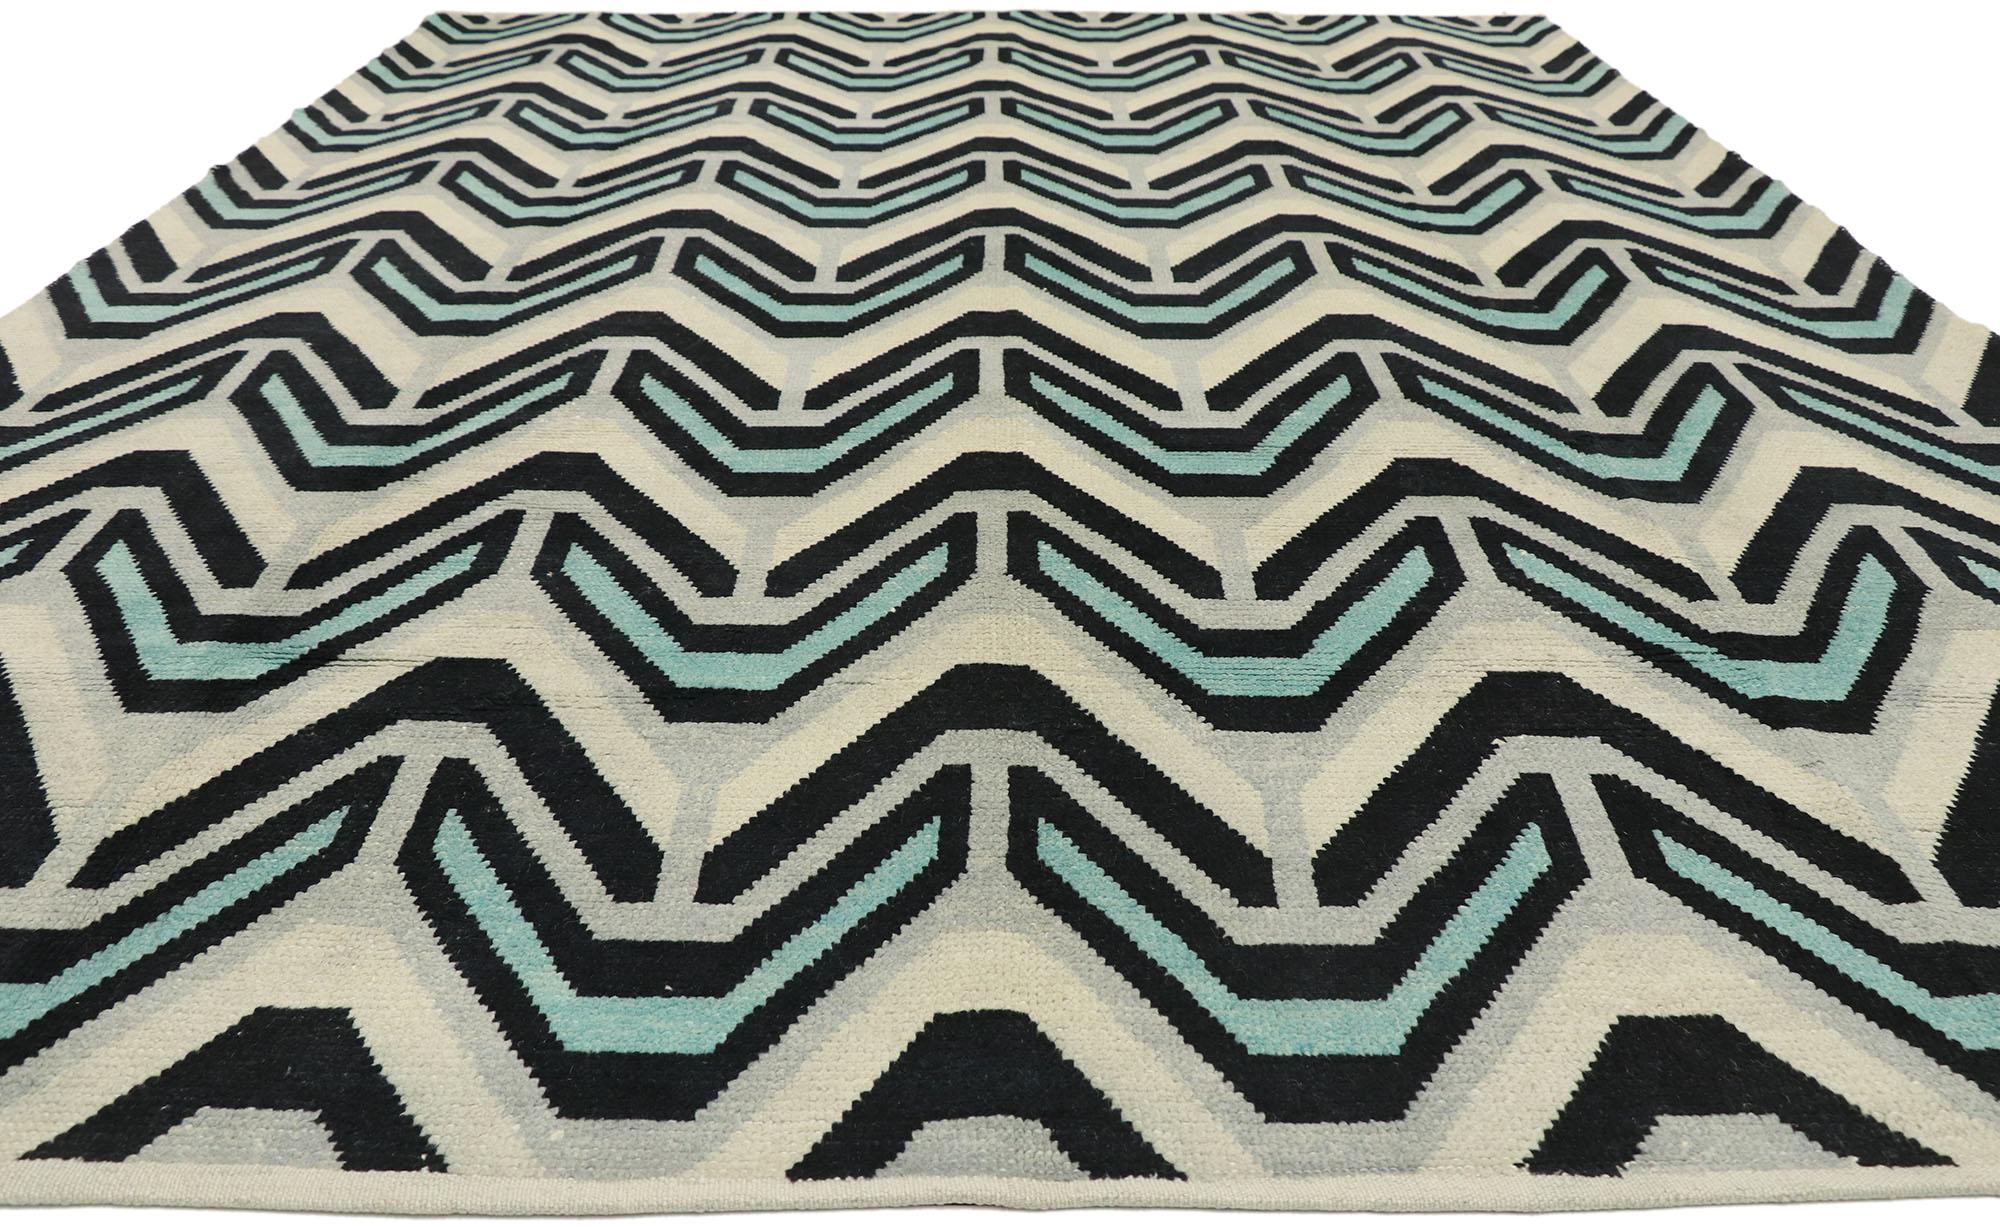 Post-Modern New Contemporary Moroccan Rug with Retro Postmodern Style